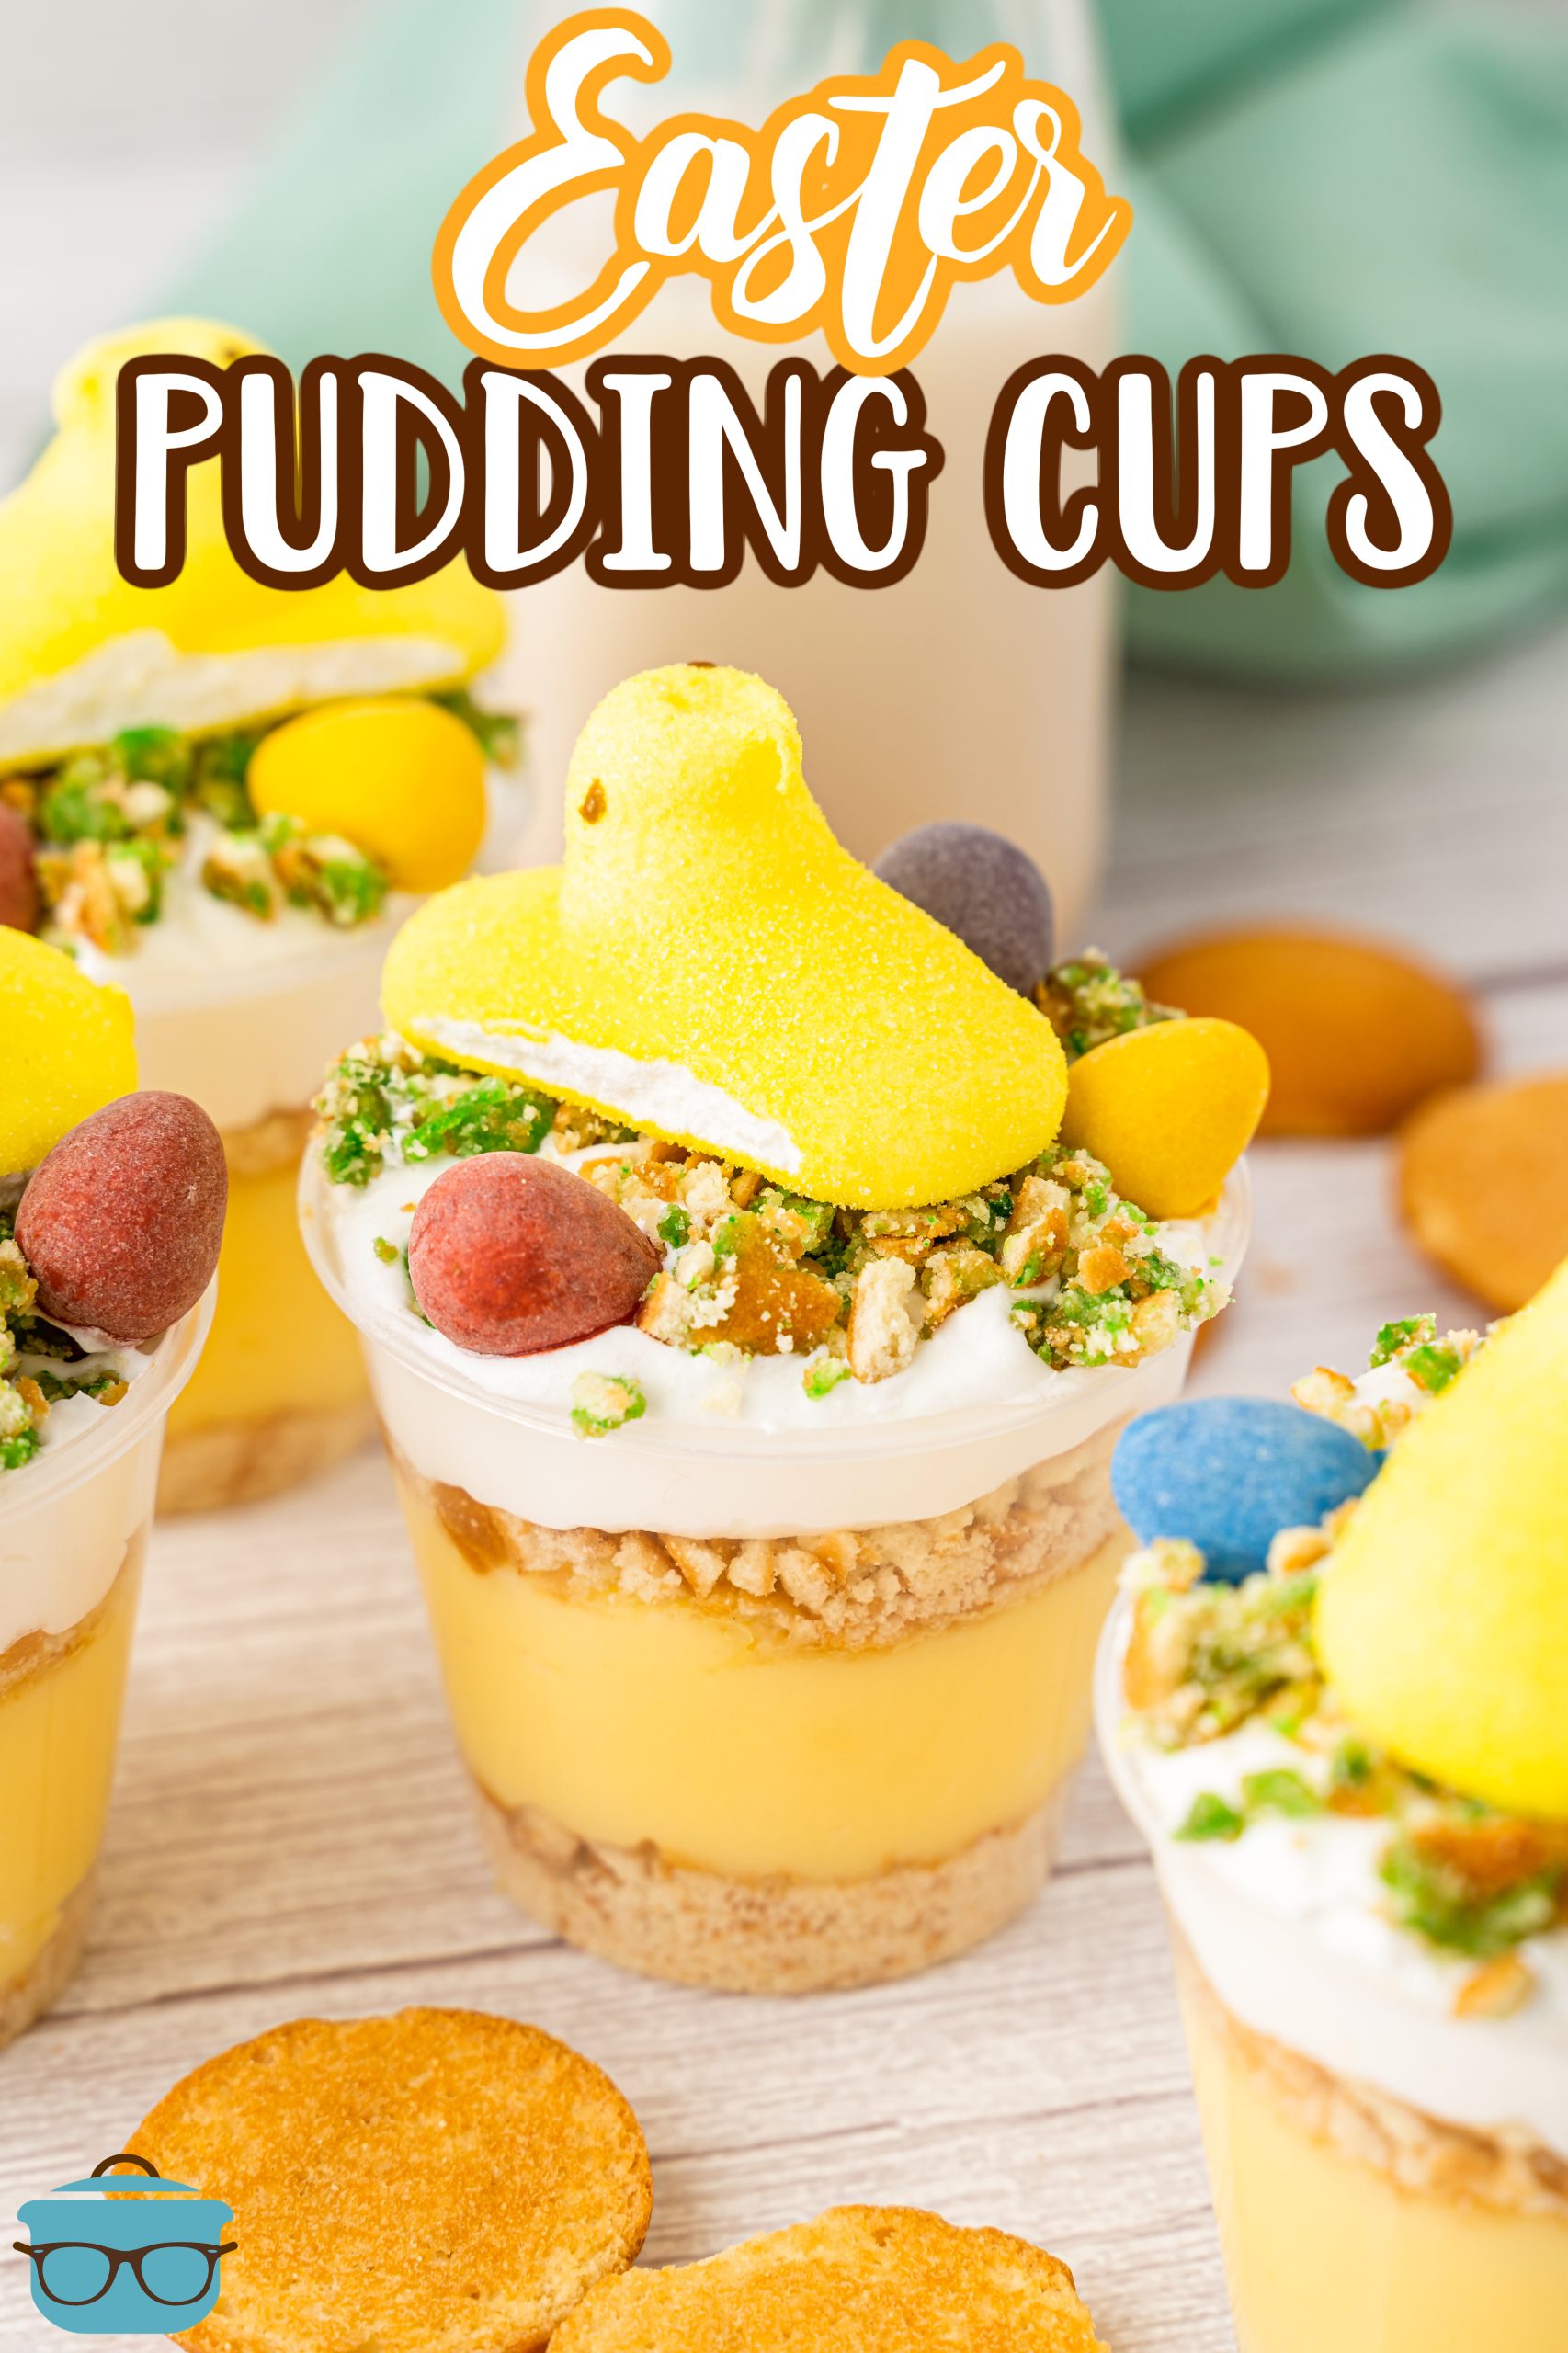 An Easter Banana Pudding Cup with layers of this dessert.